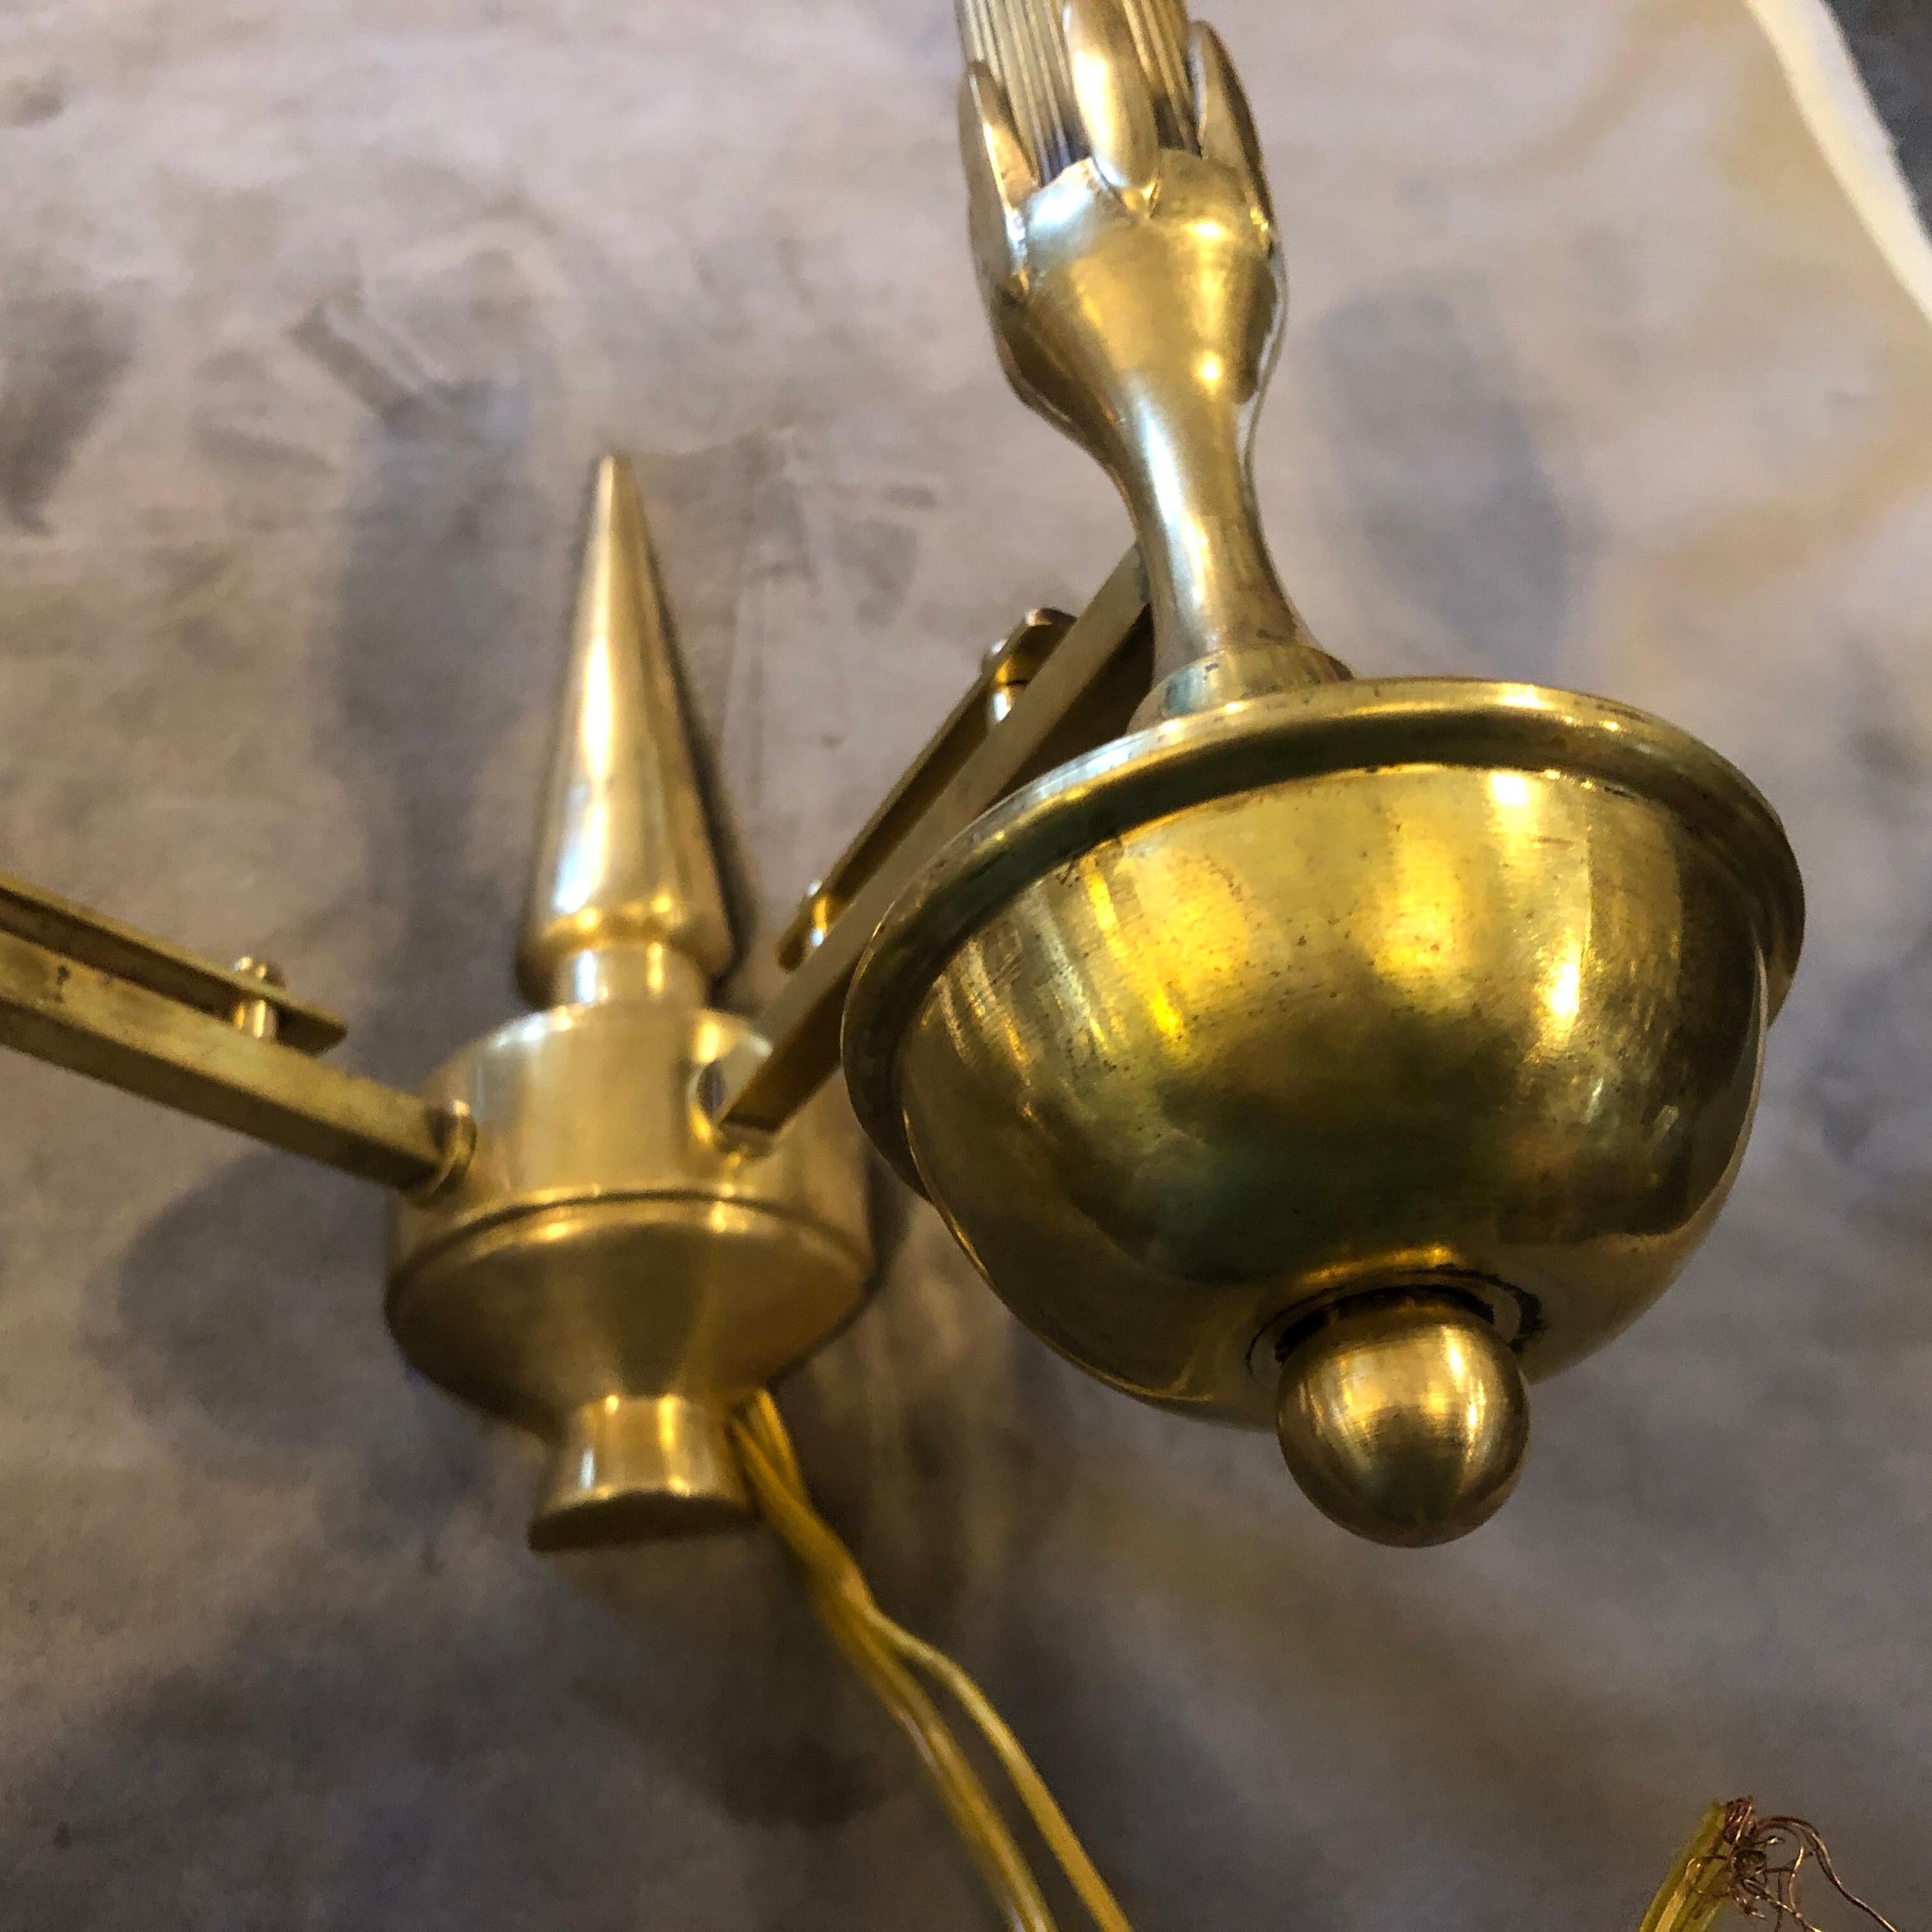 Three original patina solid brass wall sconces made in Italy in the Forties. Good conditions overall, they work 110-240 volts and need regular e14 bulbs. Price is for one sconce. The Wall Sconces are elegant and sophisticated lighting fixtures that